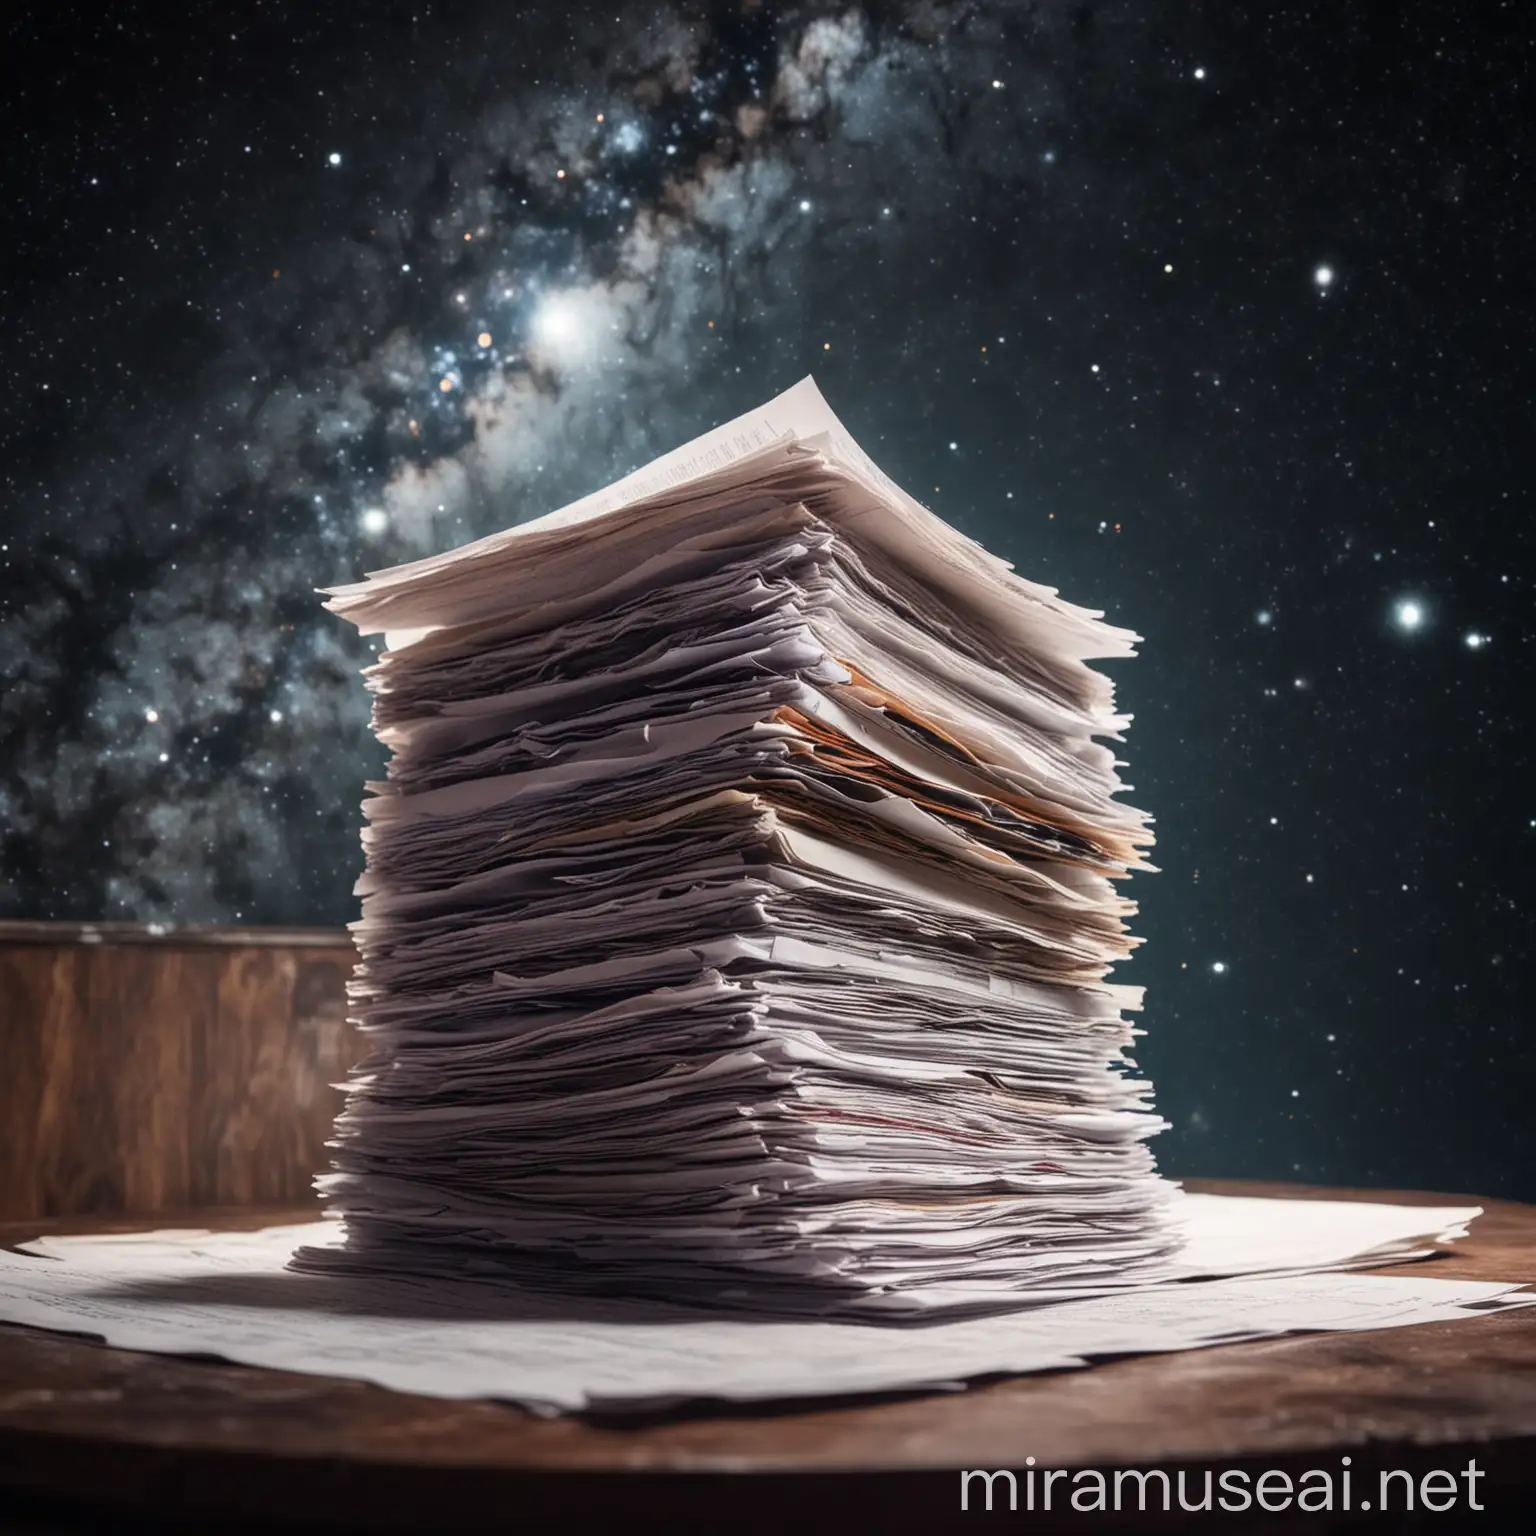 A stack of documents is on the table in space